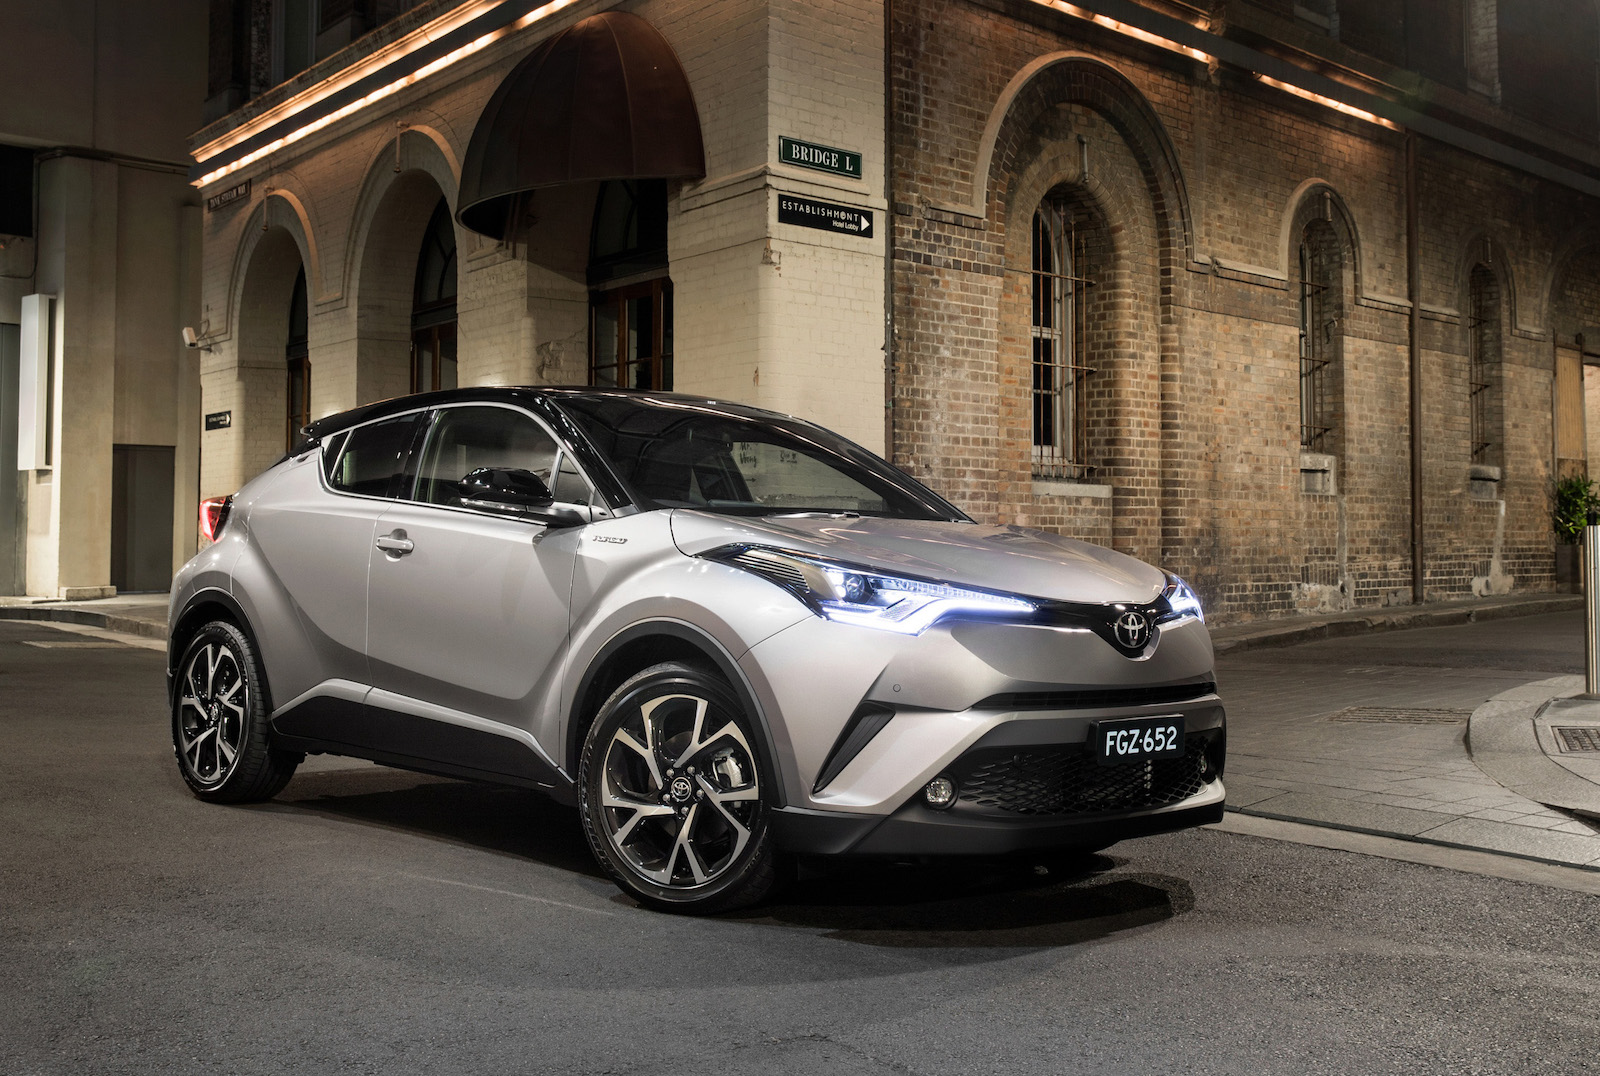 Toyota C-HR off to a great start in Europe, production can’t meet demand